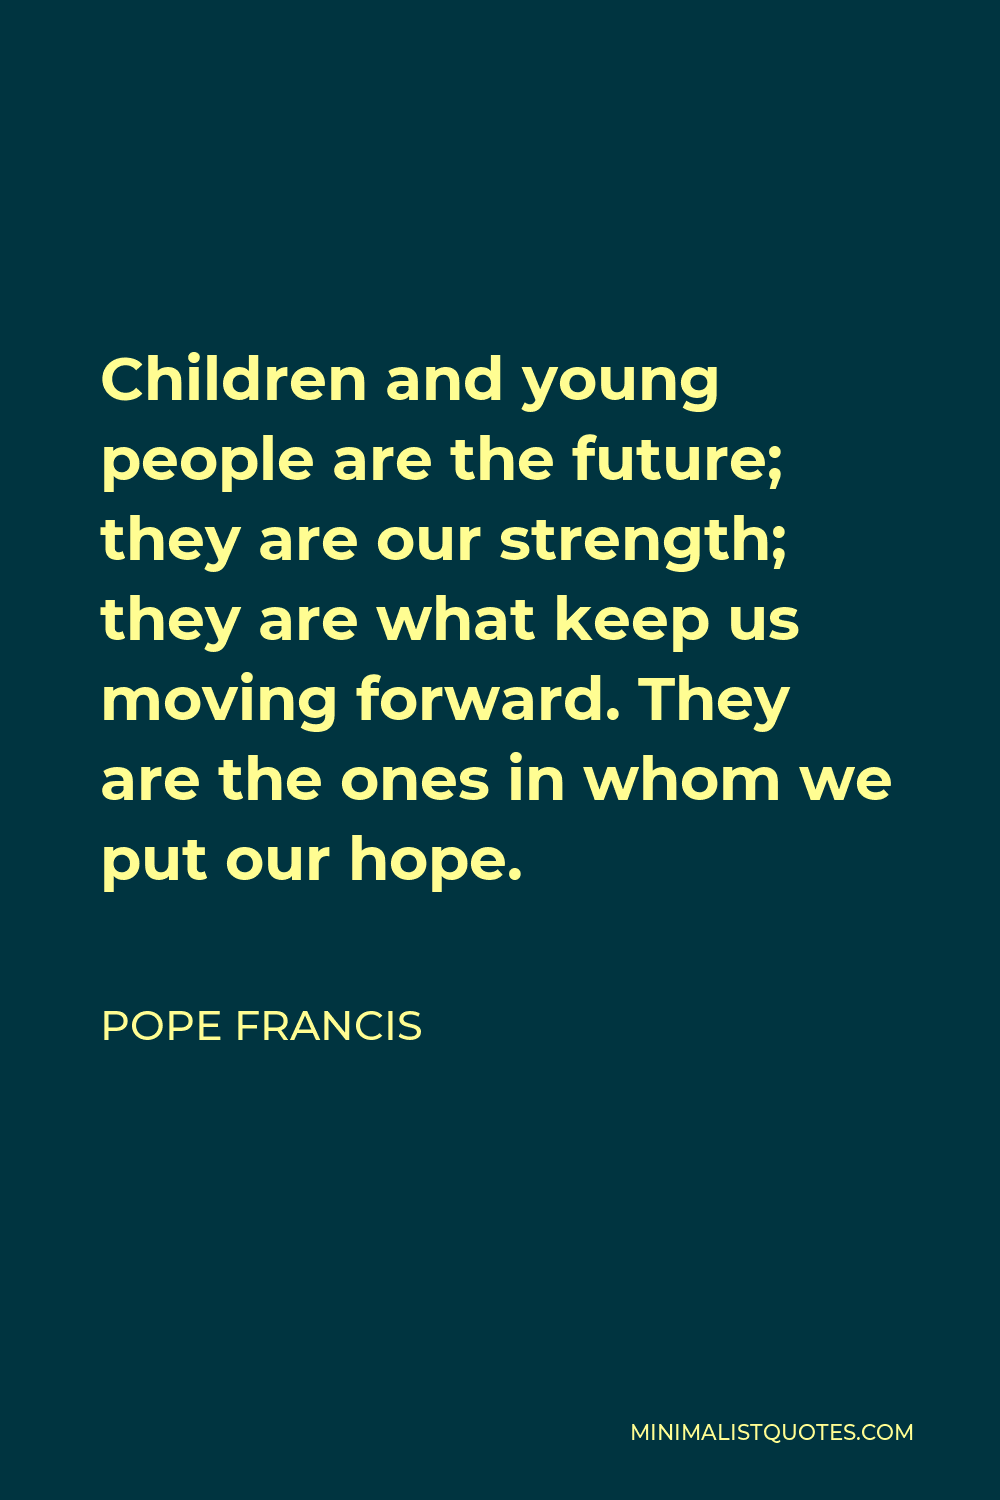 Pope Francis Quote: Children and young people are the future; they are our  strength; they are what keep us moving forward. They are the ones in whom  we put our hope.